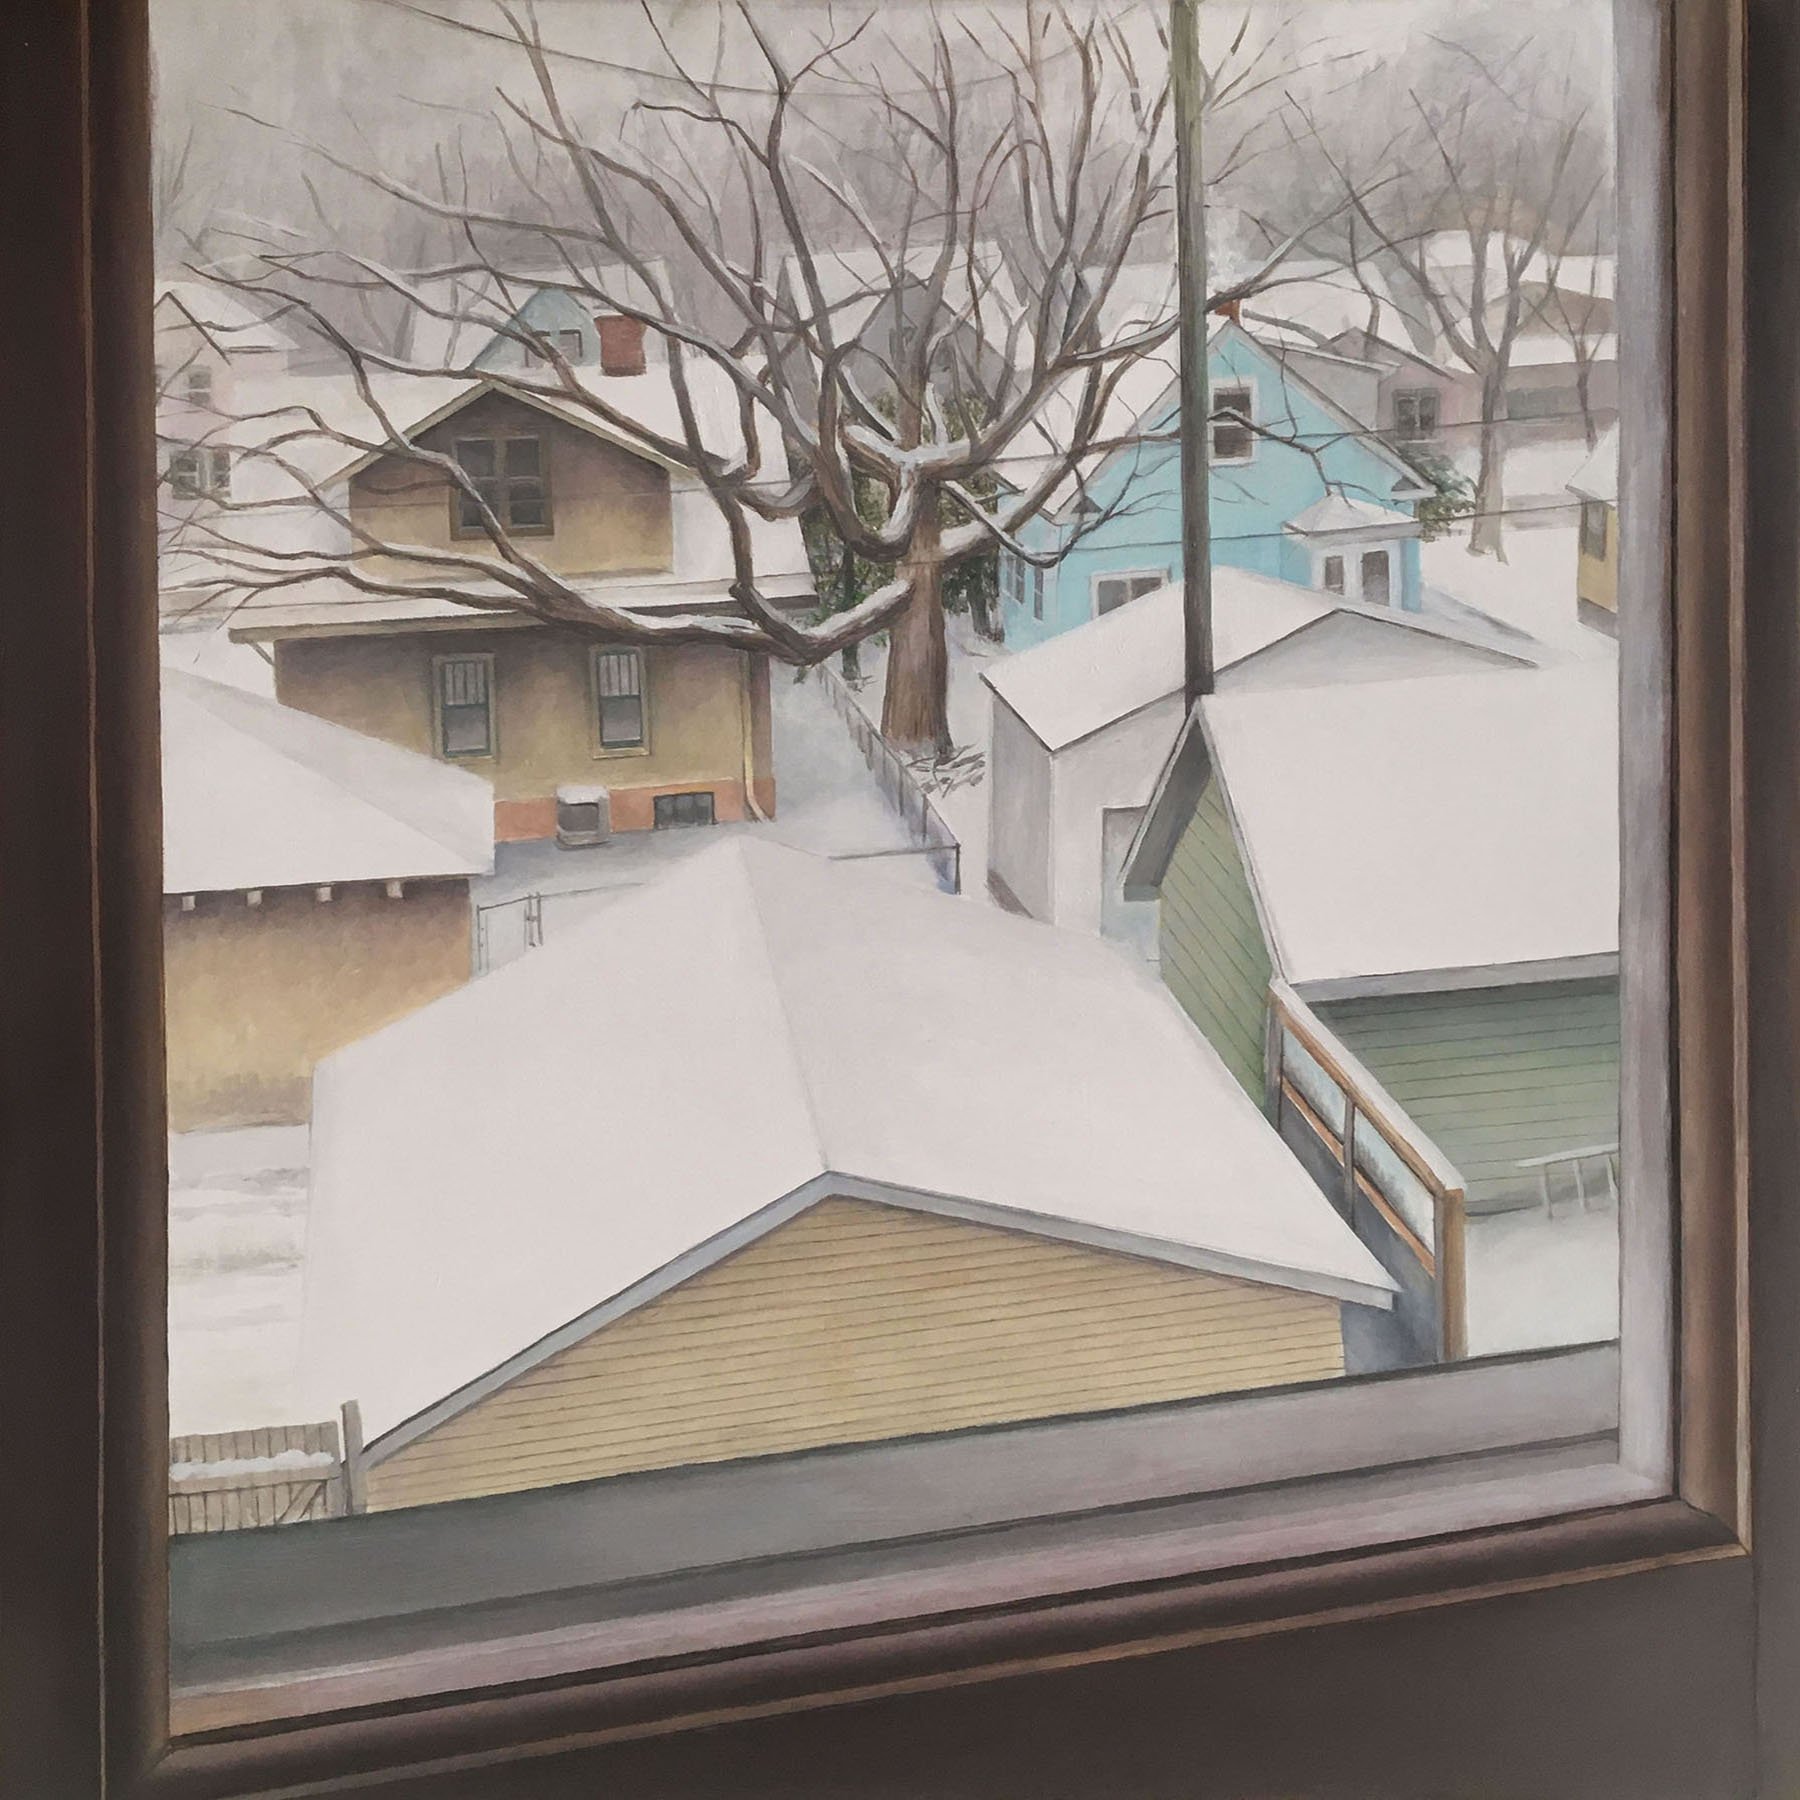   Backyard View in Winter   2022  Oil on panel  16 x 16 inches   